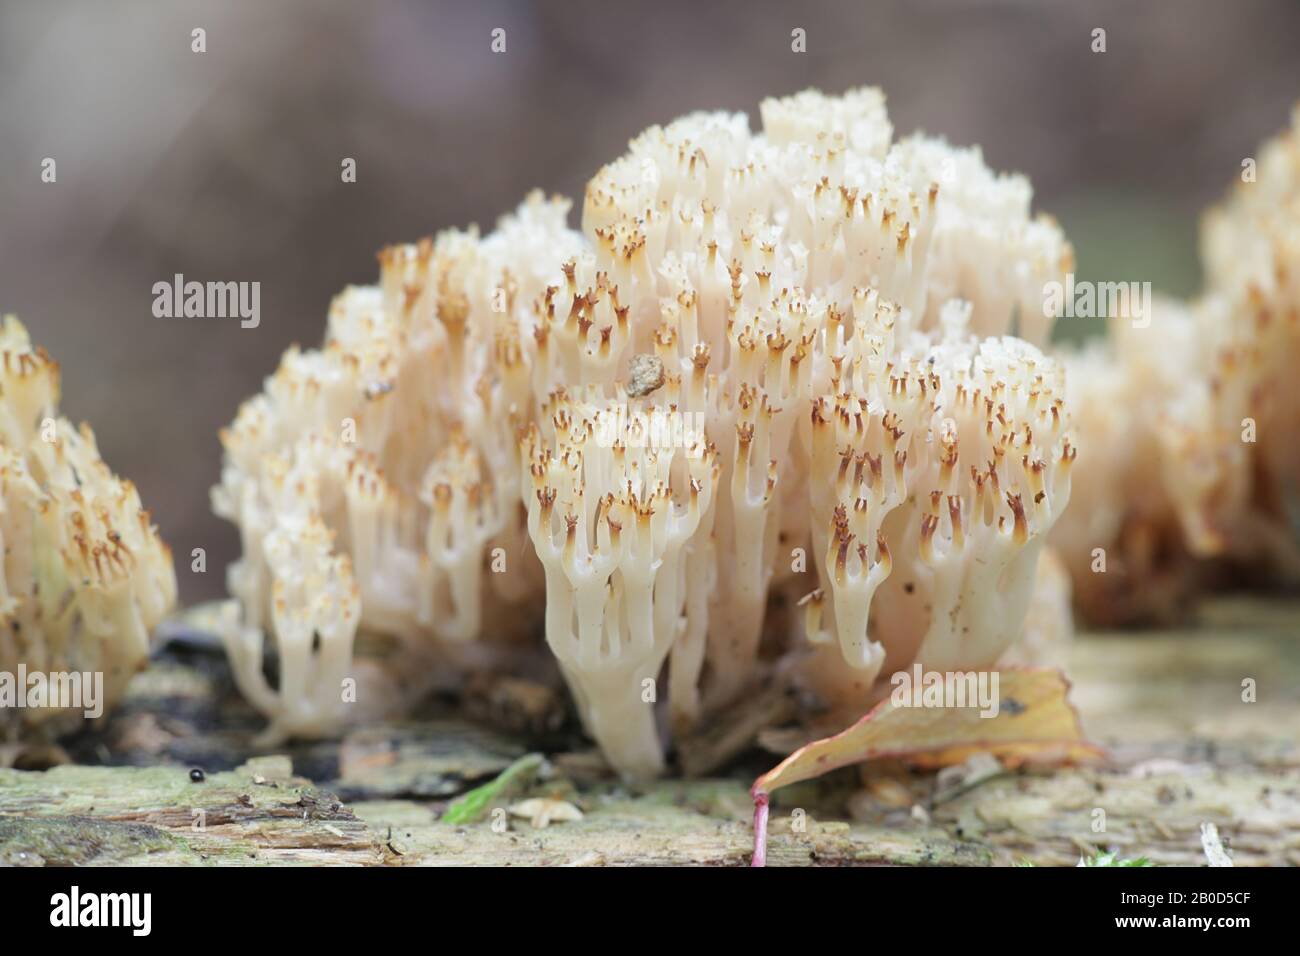 Artomyces pyxidatus, commonly called crown coral or crown-tipped coral fungus, wild mushroom from Finland Stock Photo